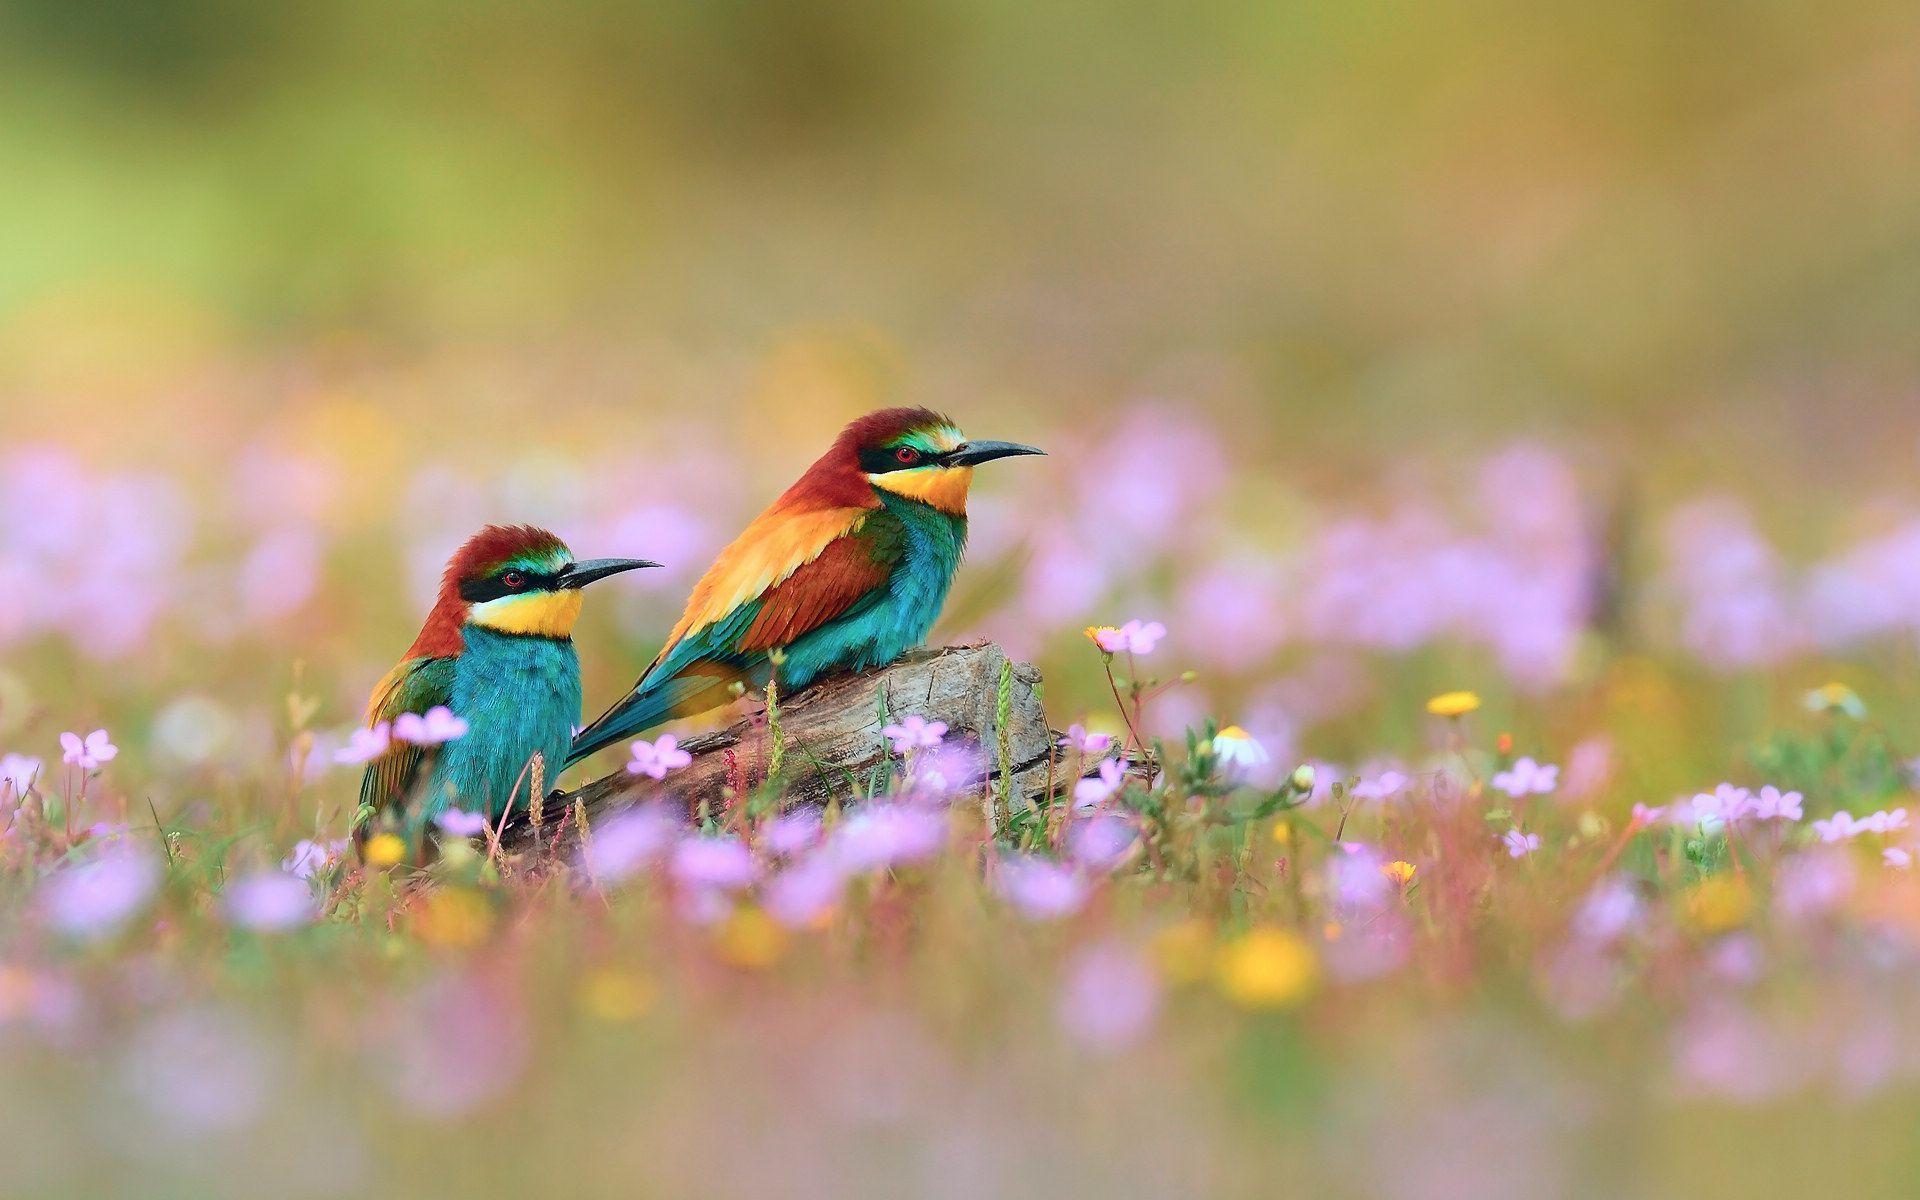 Spring Flowers And Birds Wallpaper Picture 5 HD Wallpaper. My